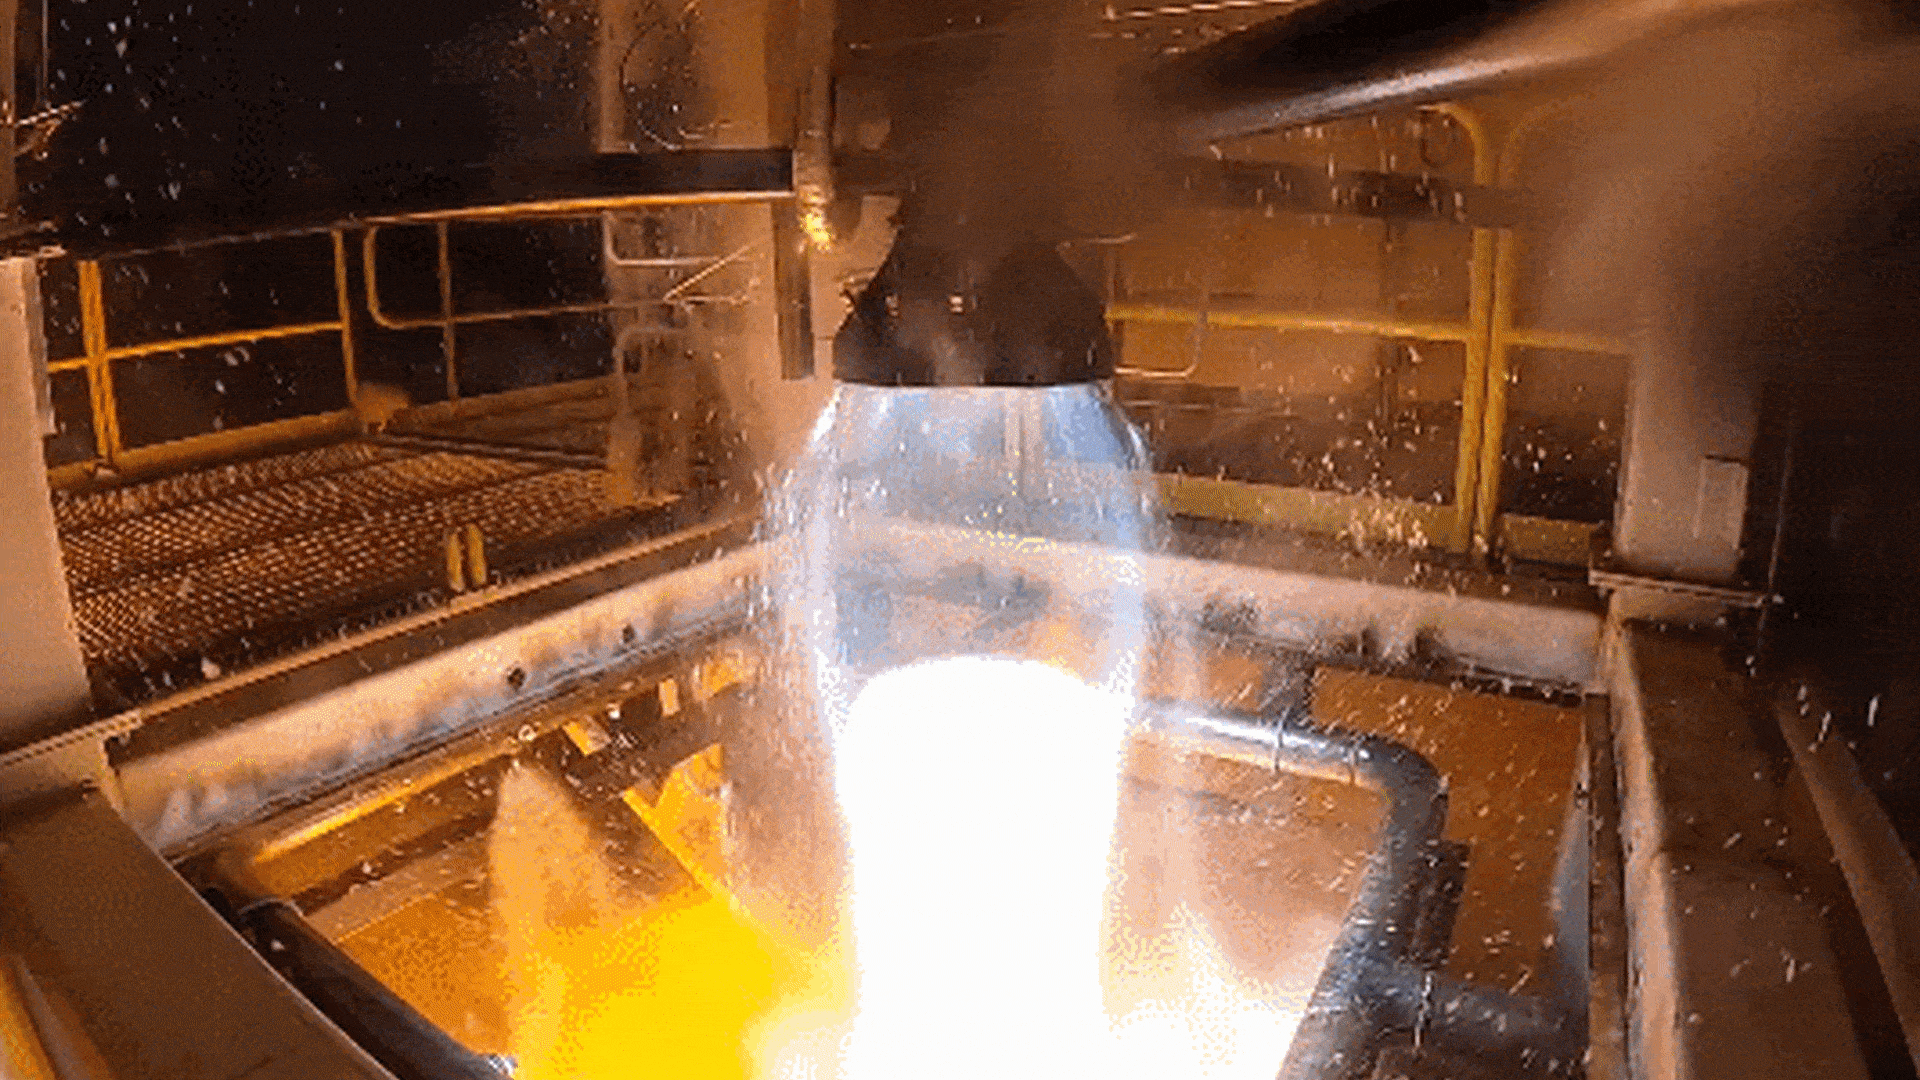 Tests of the Aeon 1 rocket engine